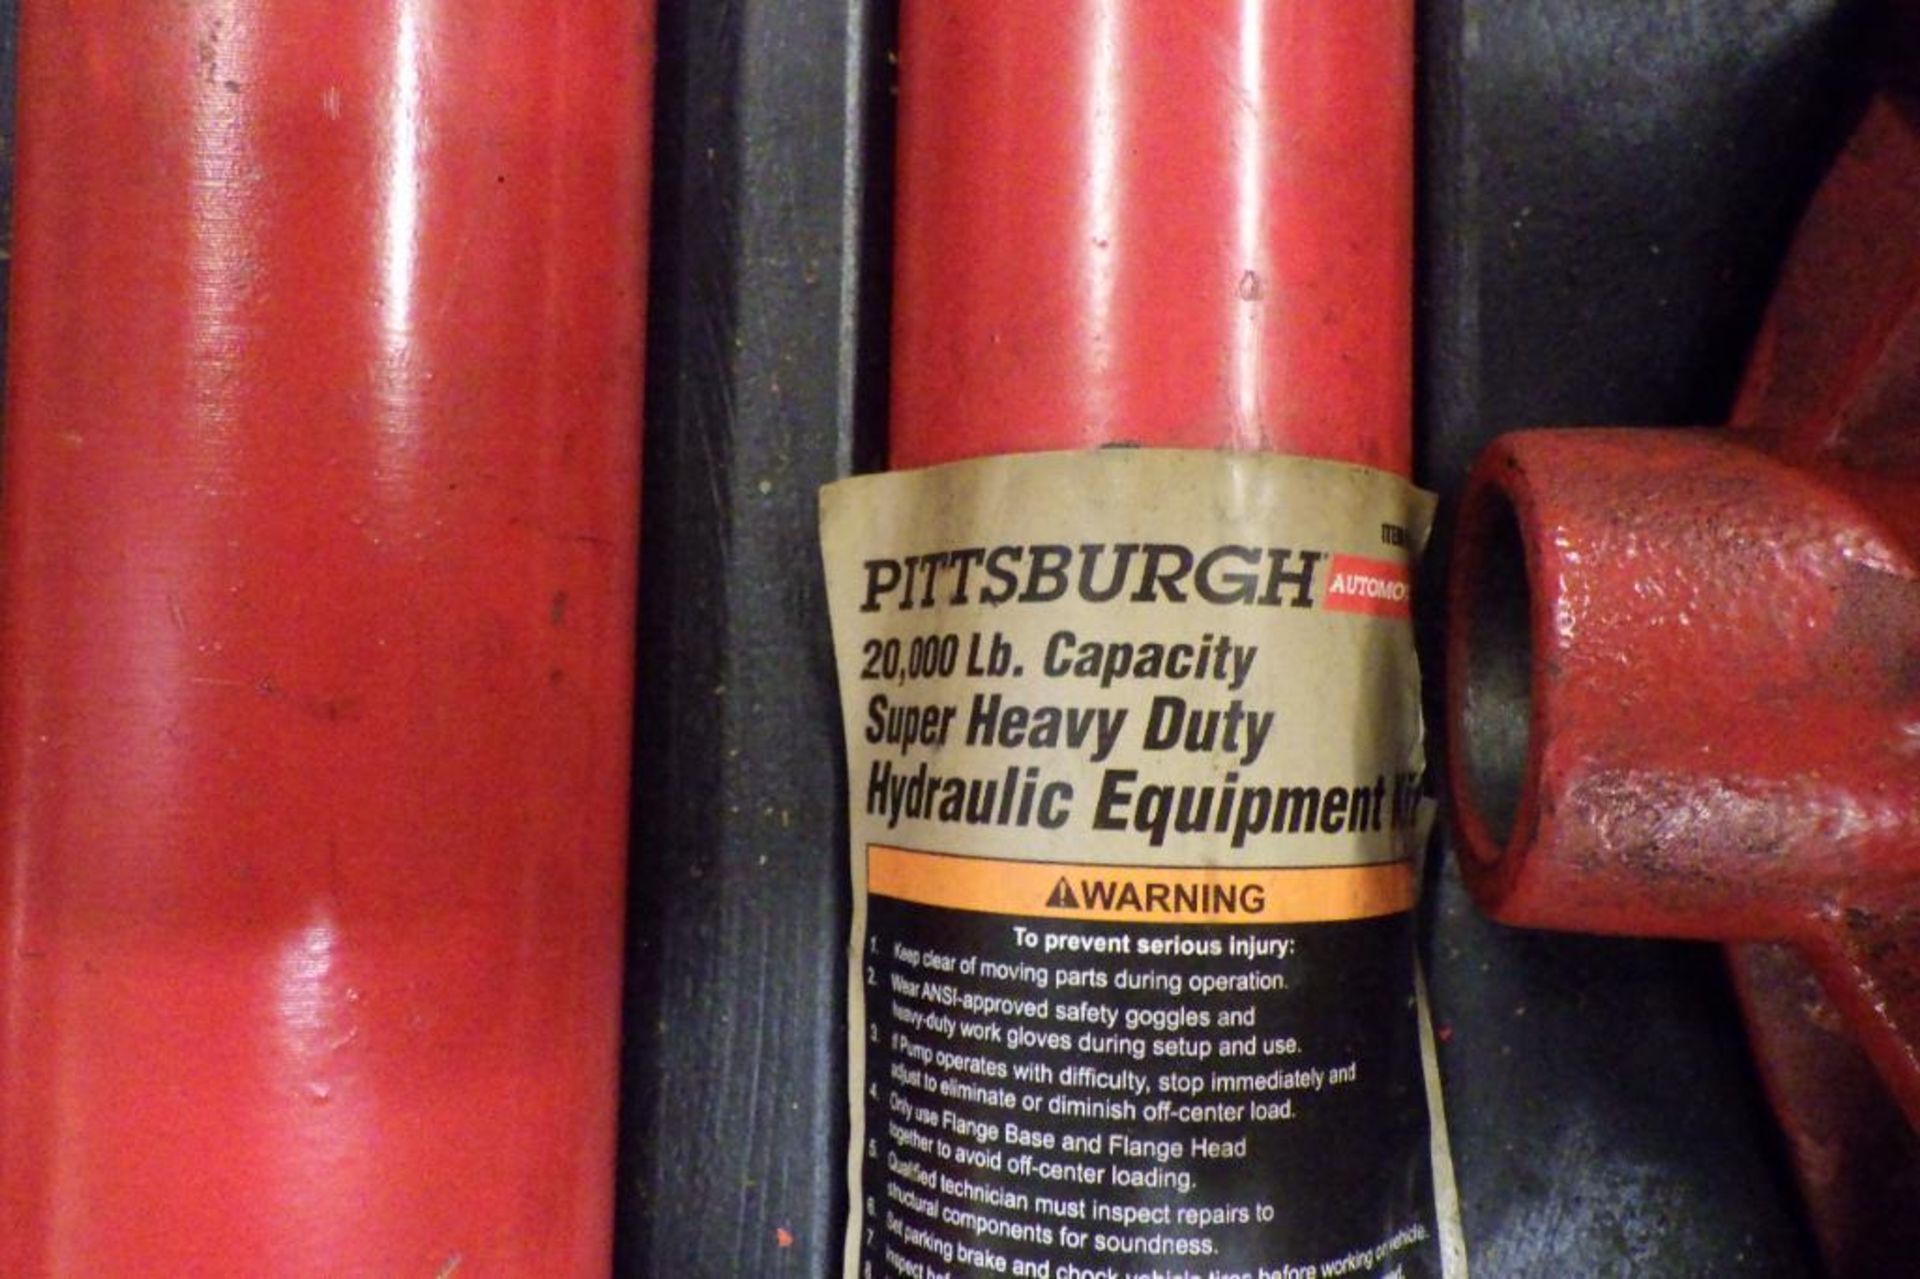 Pittsburg super heavy duty hydraulic power pack - Image 4 of 5